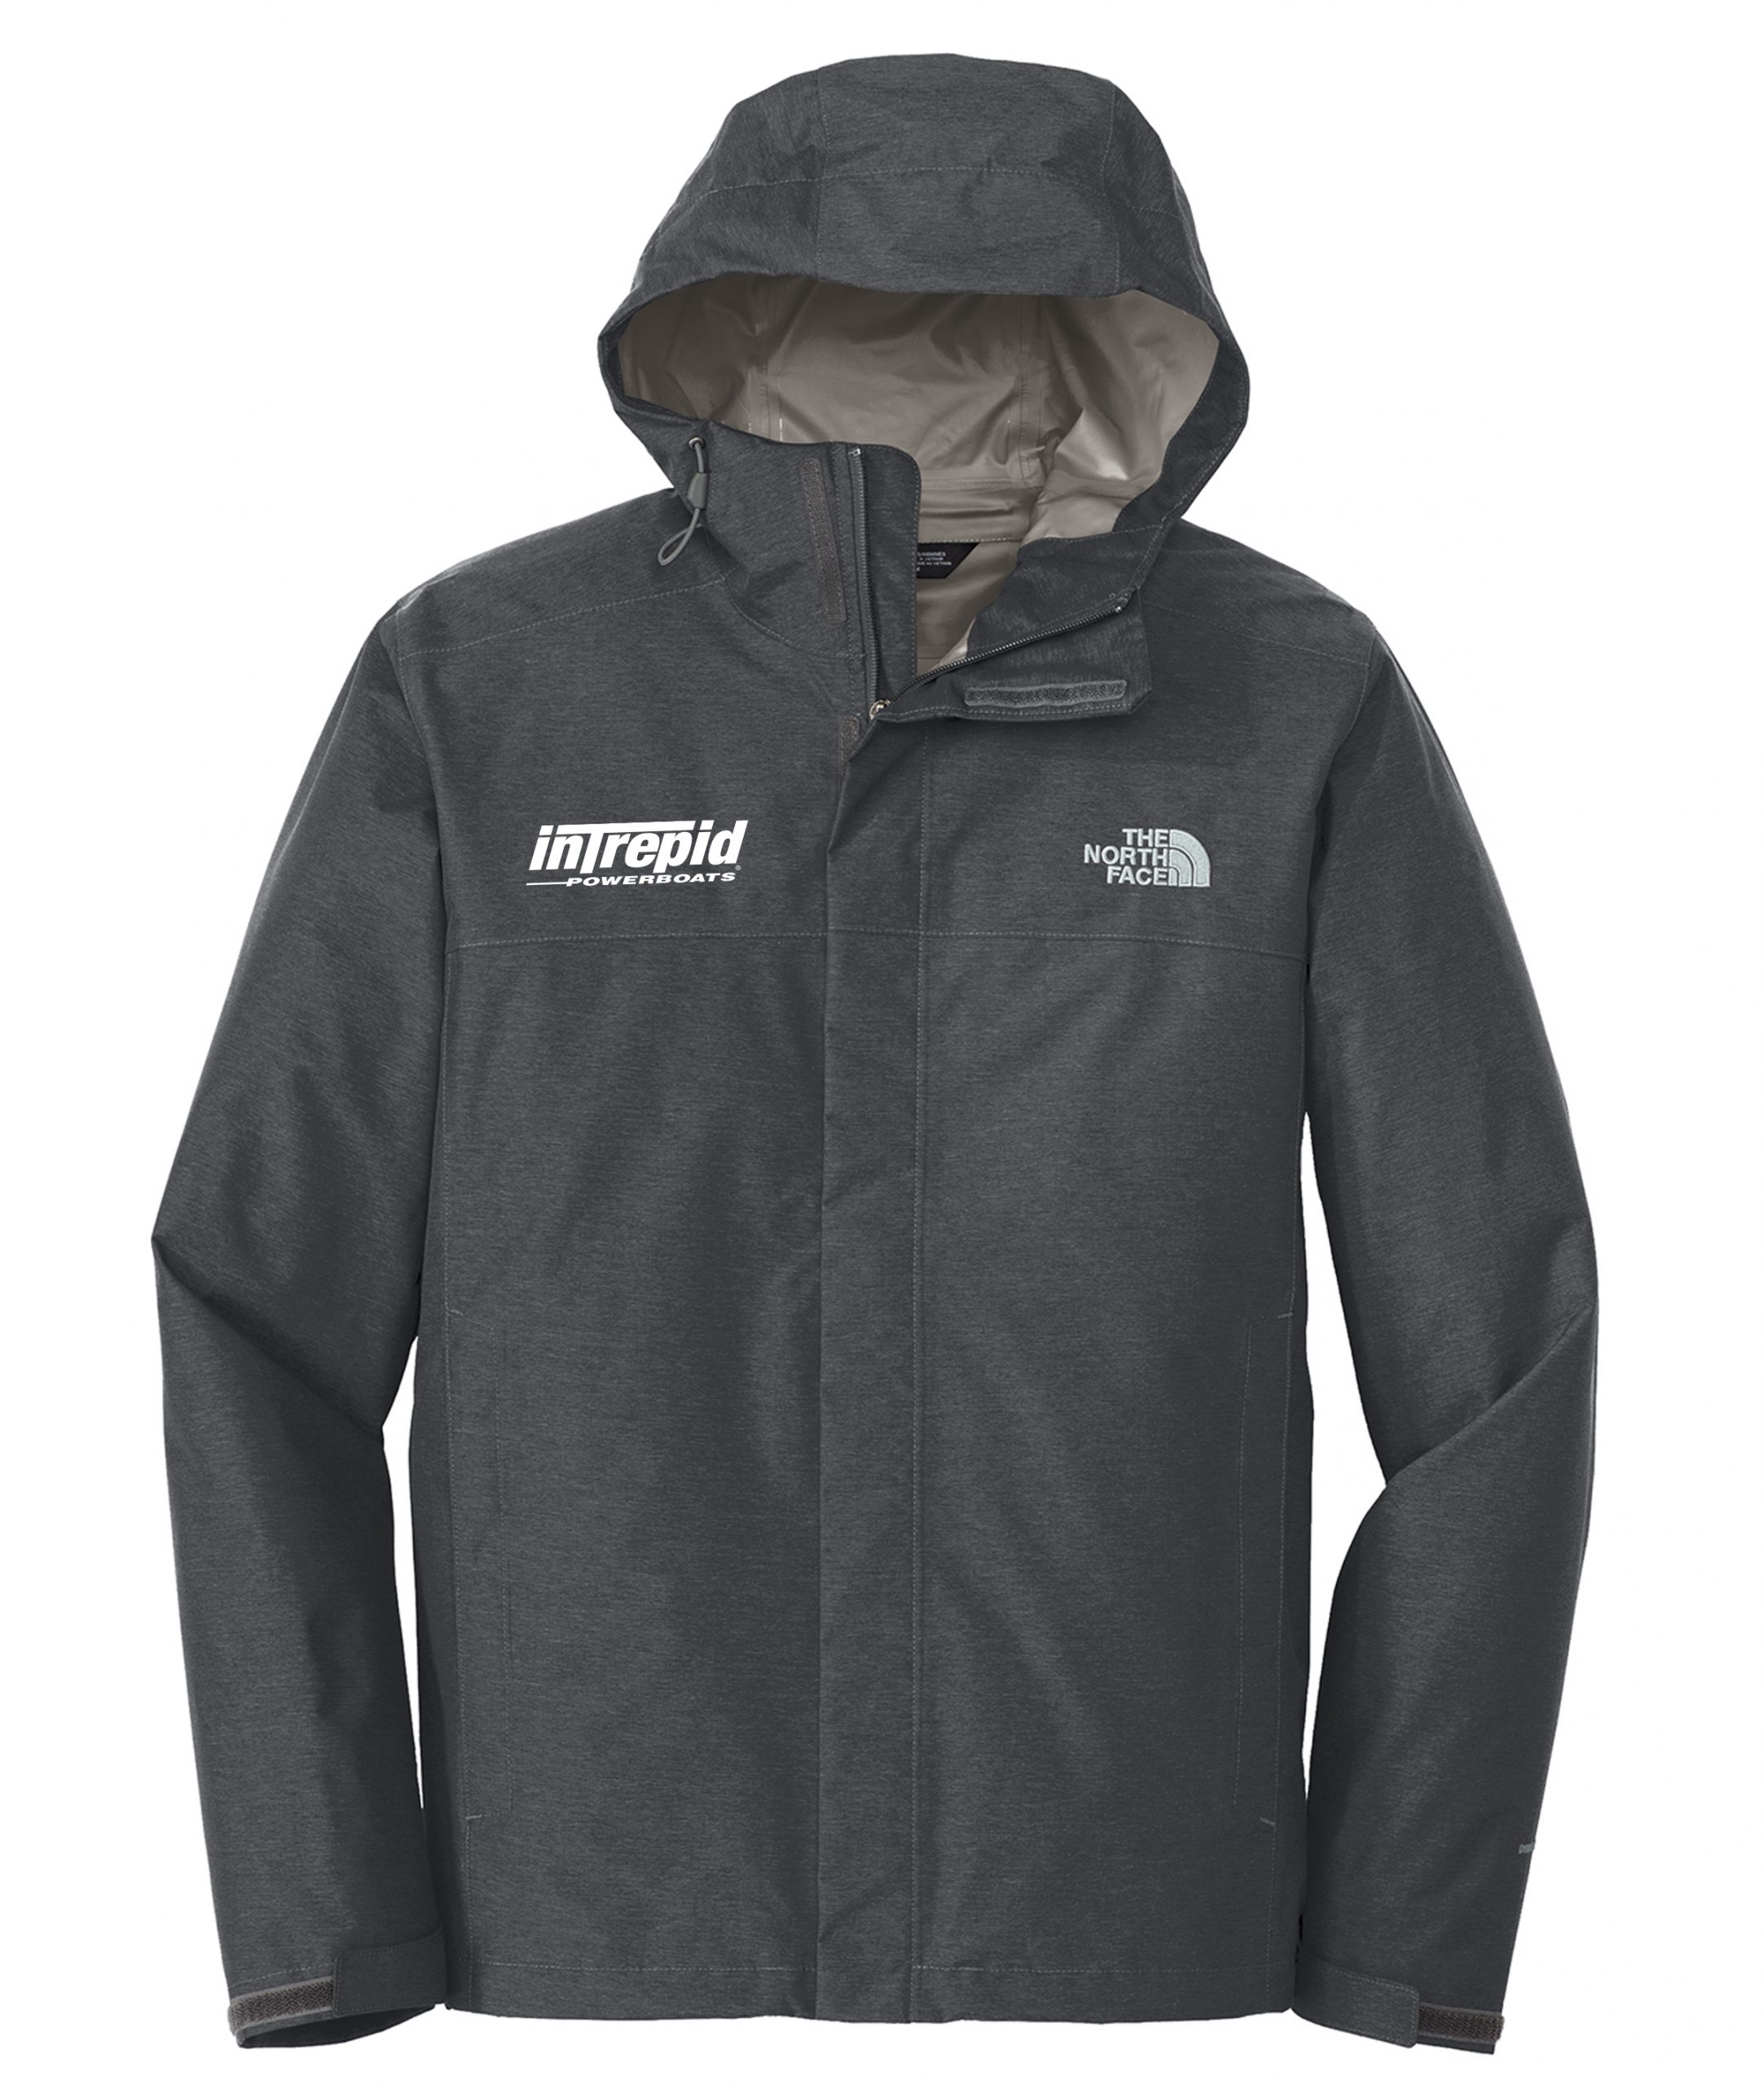 The North Face® DryVent™ Rain Jacket | Intrepid Power Boats Gear